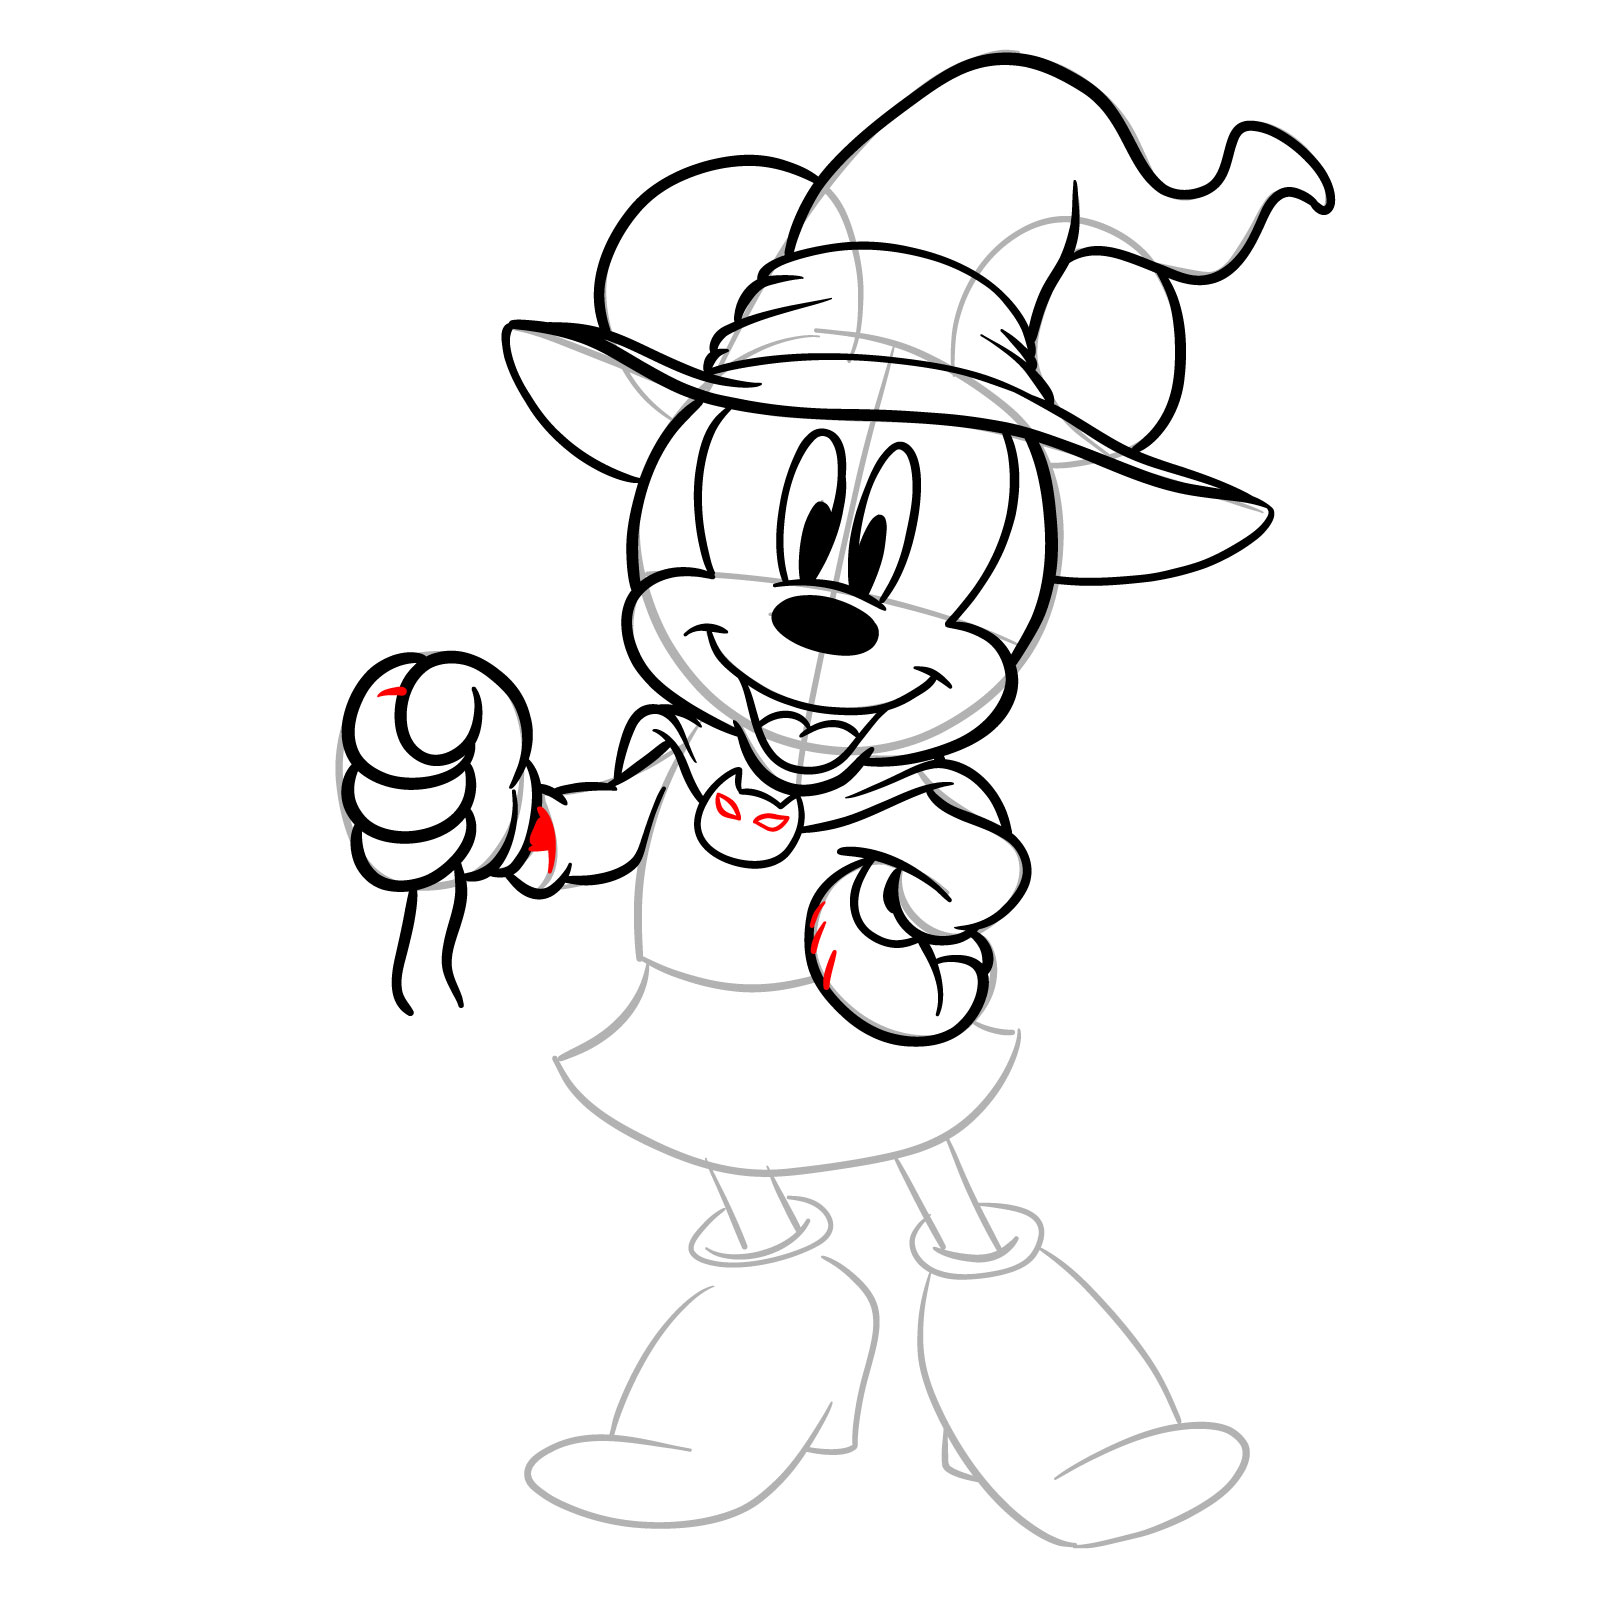 How to draw Halloween Minnie Mouse as a witch - step 21